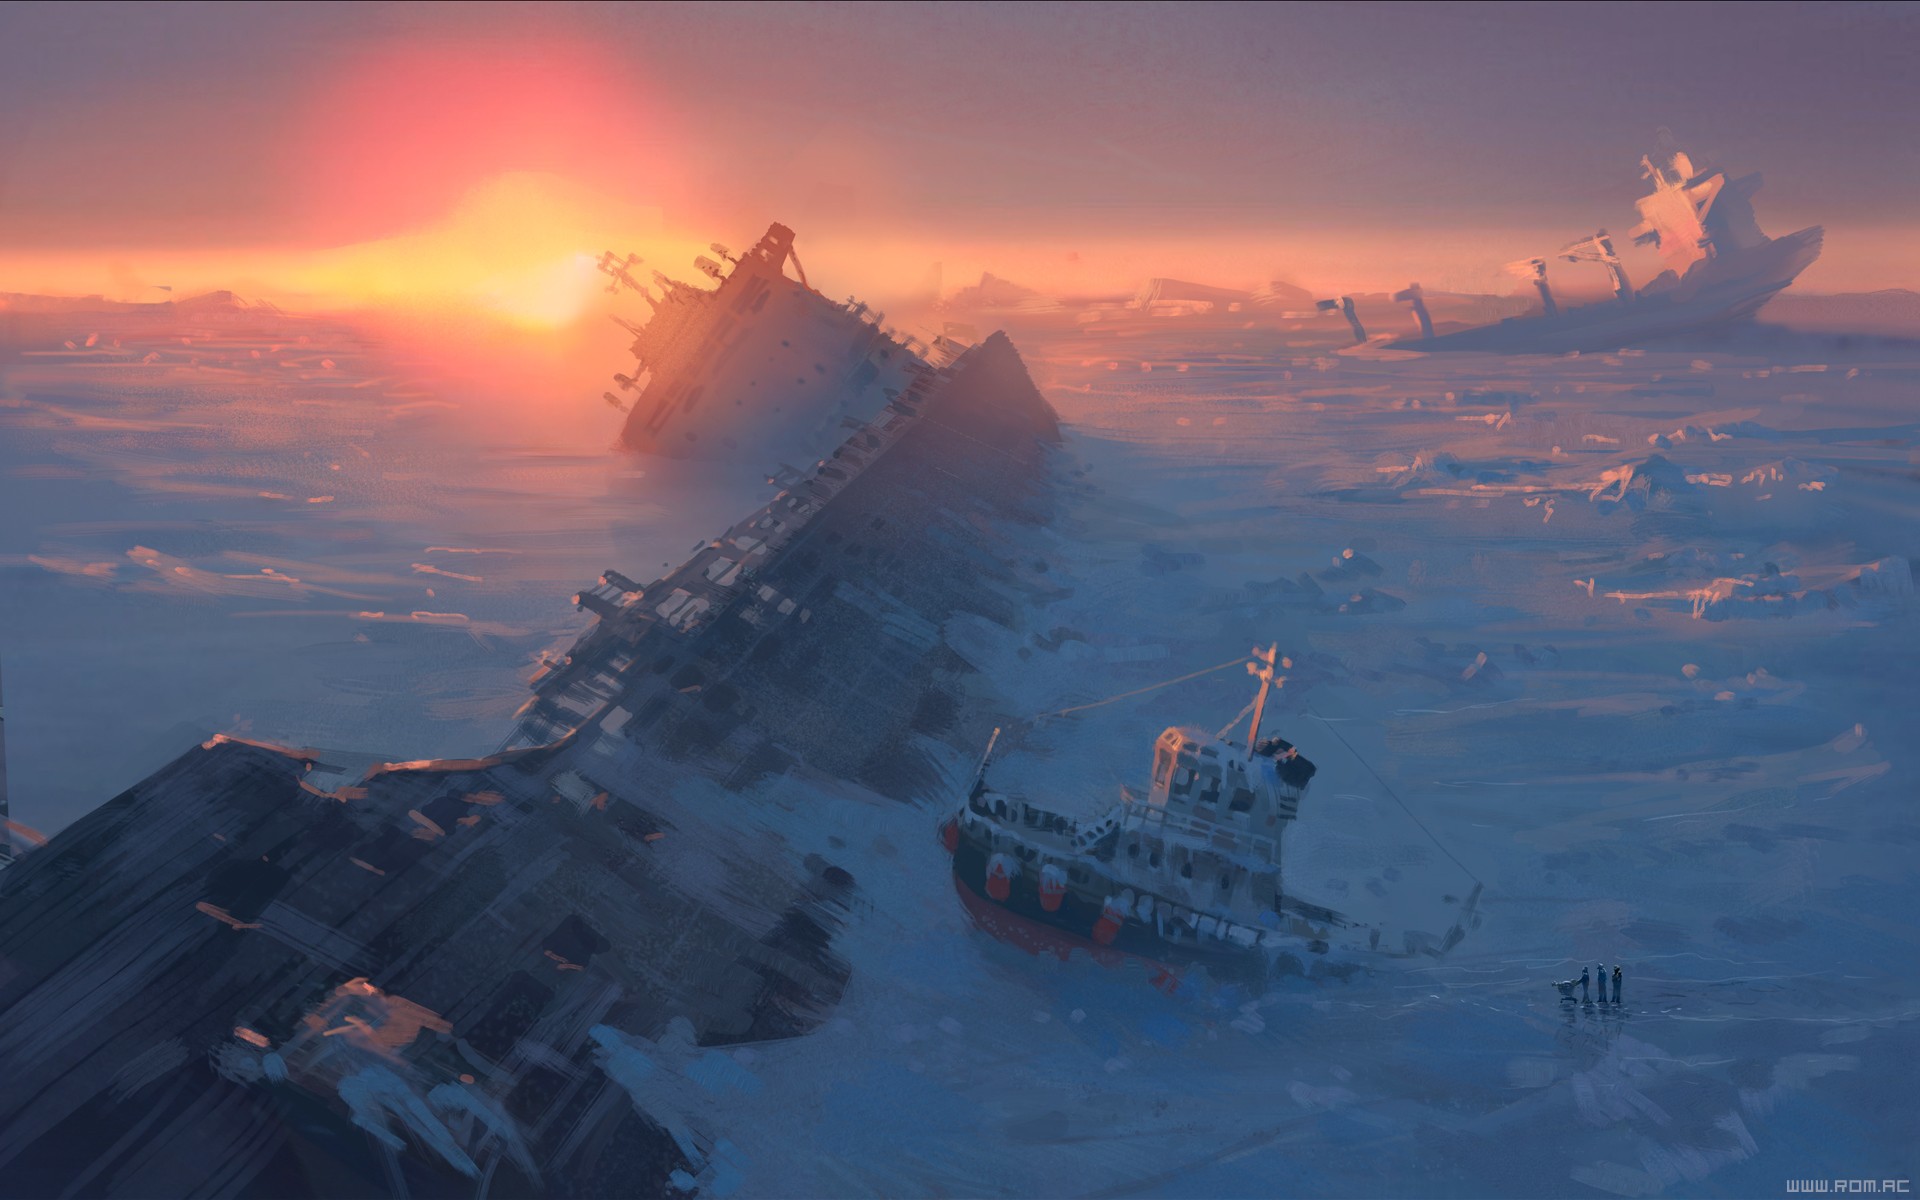 General 1920x1200 Vitaly S Alexius ship shipwreck frost ice apocalyptic watermarked digital art sunset sea